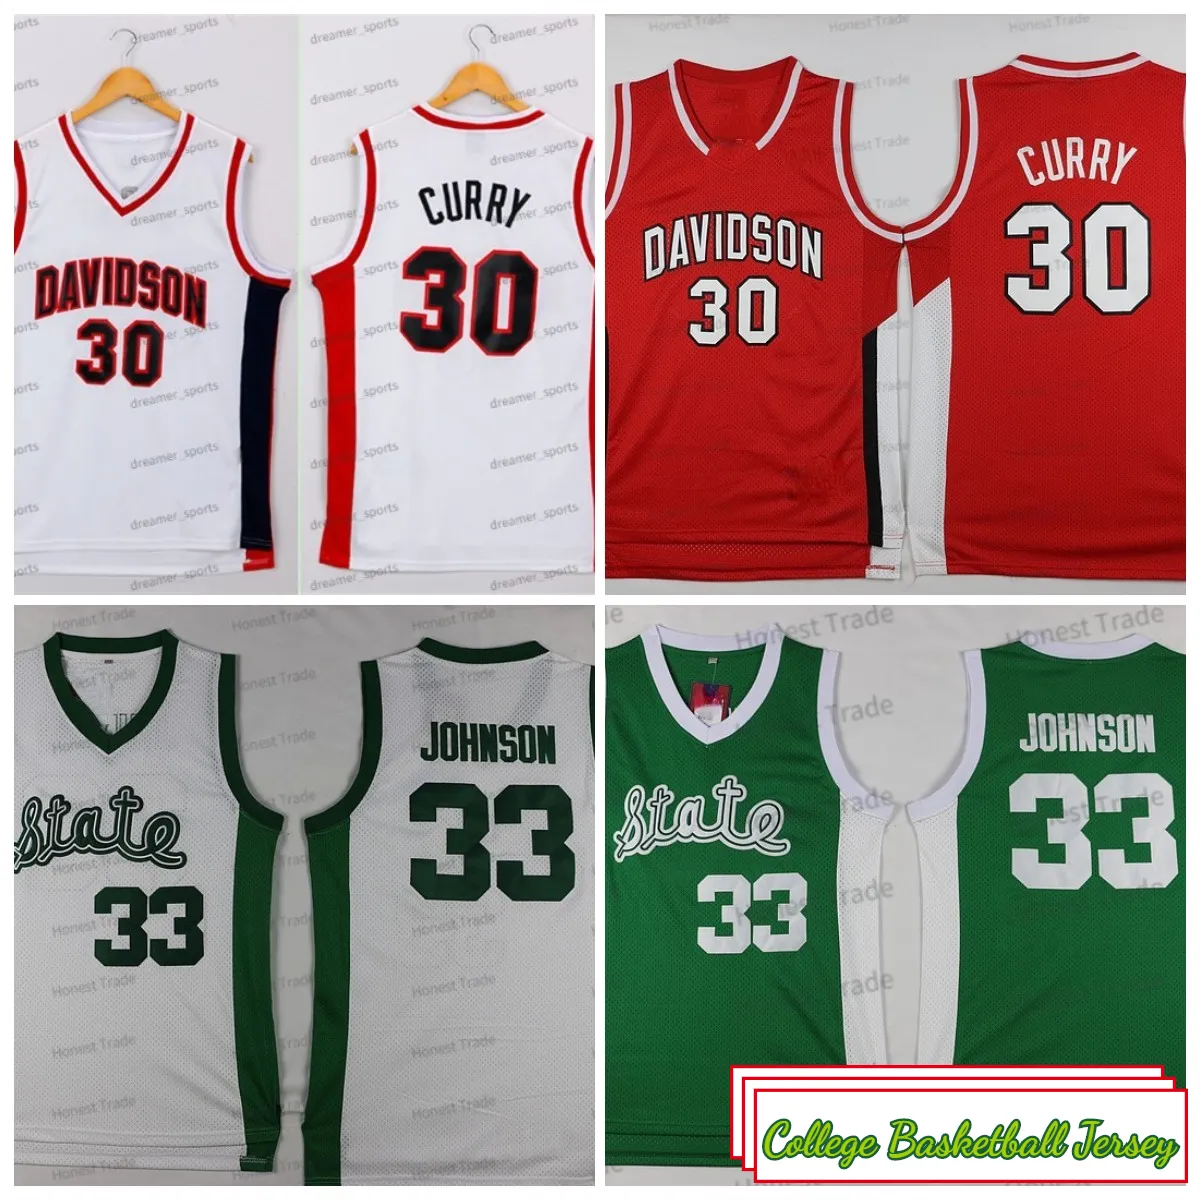 Maillot de basket-ball Ncaa State 33 Johnson Davidson 30 Stephen White Curry Green High School Retro Maillots pour hommes